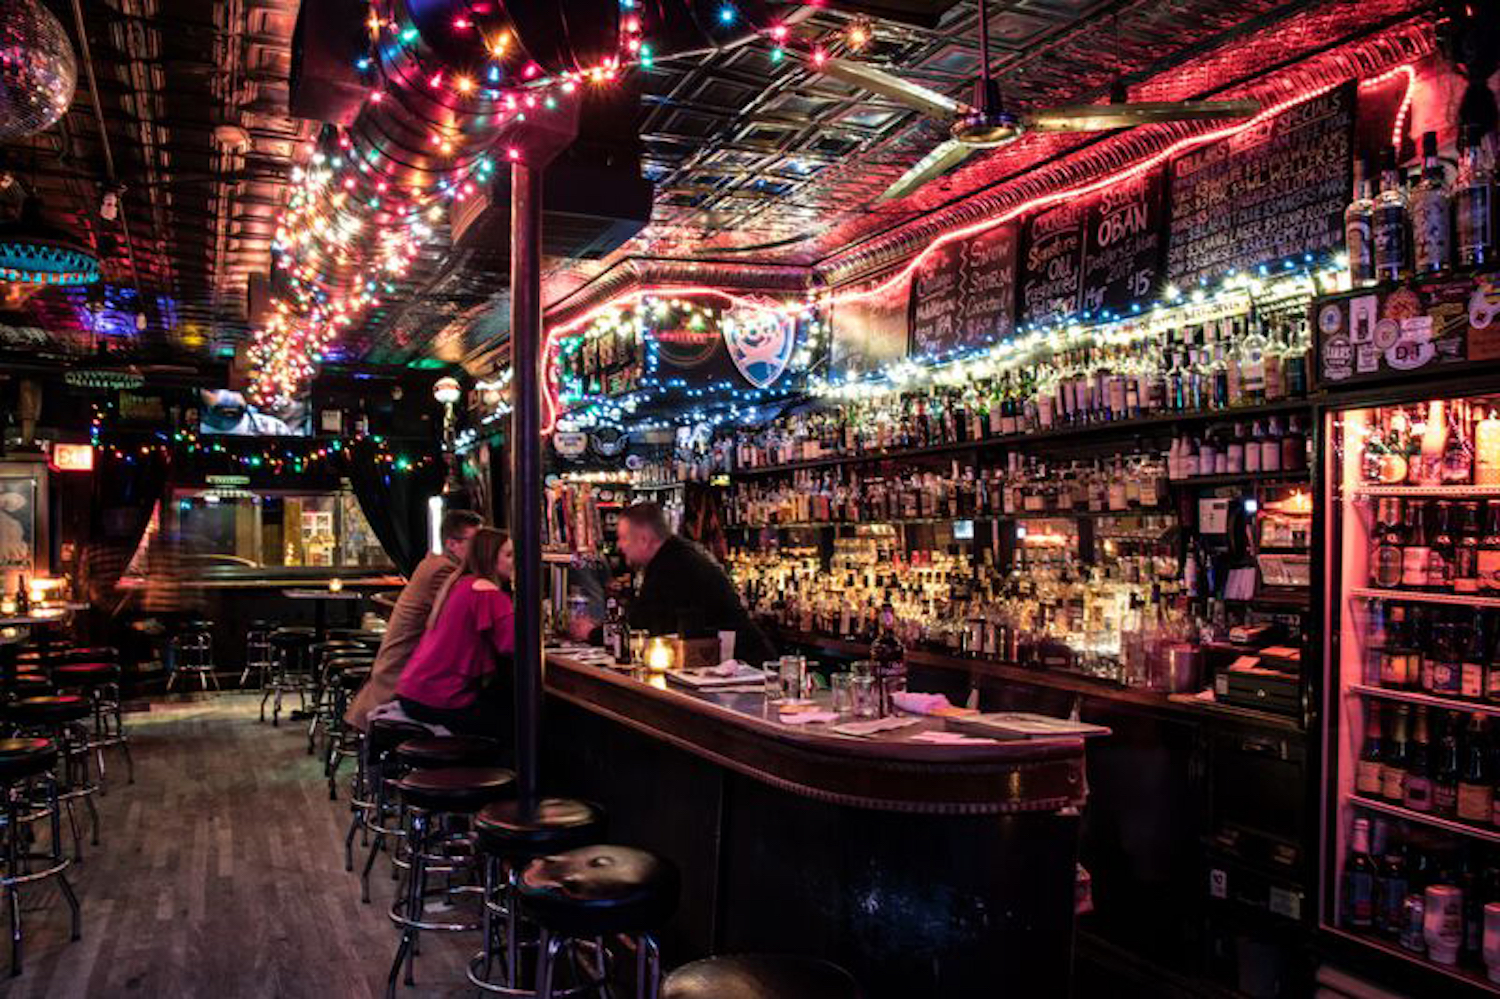 Dimly lit bar area surrounded by bright and colorful string lights.